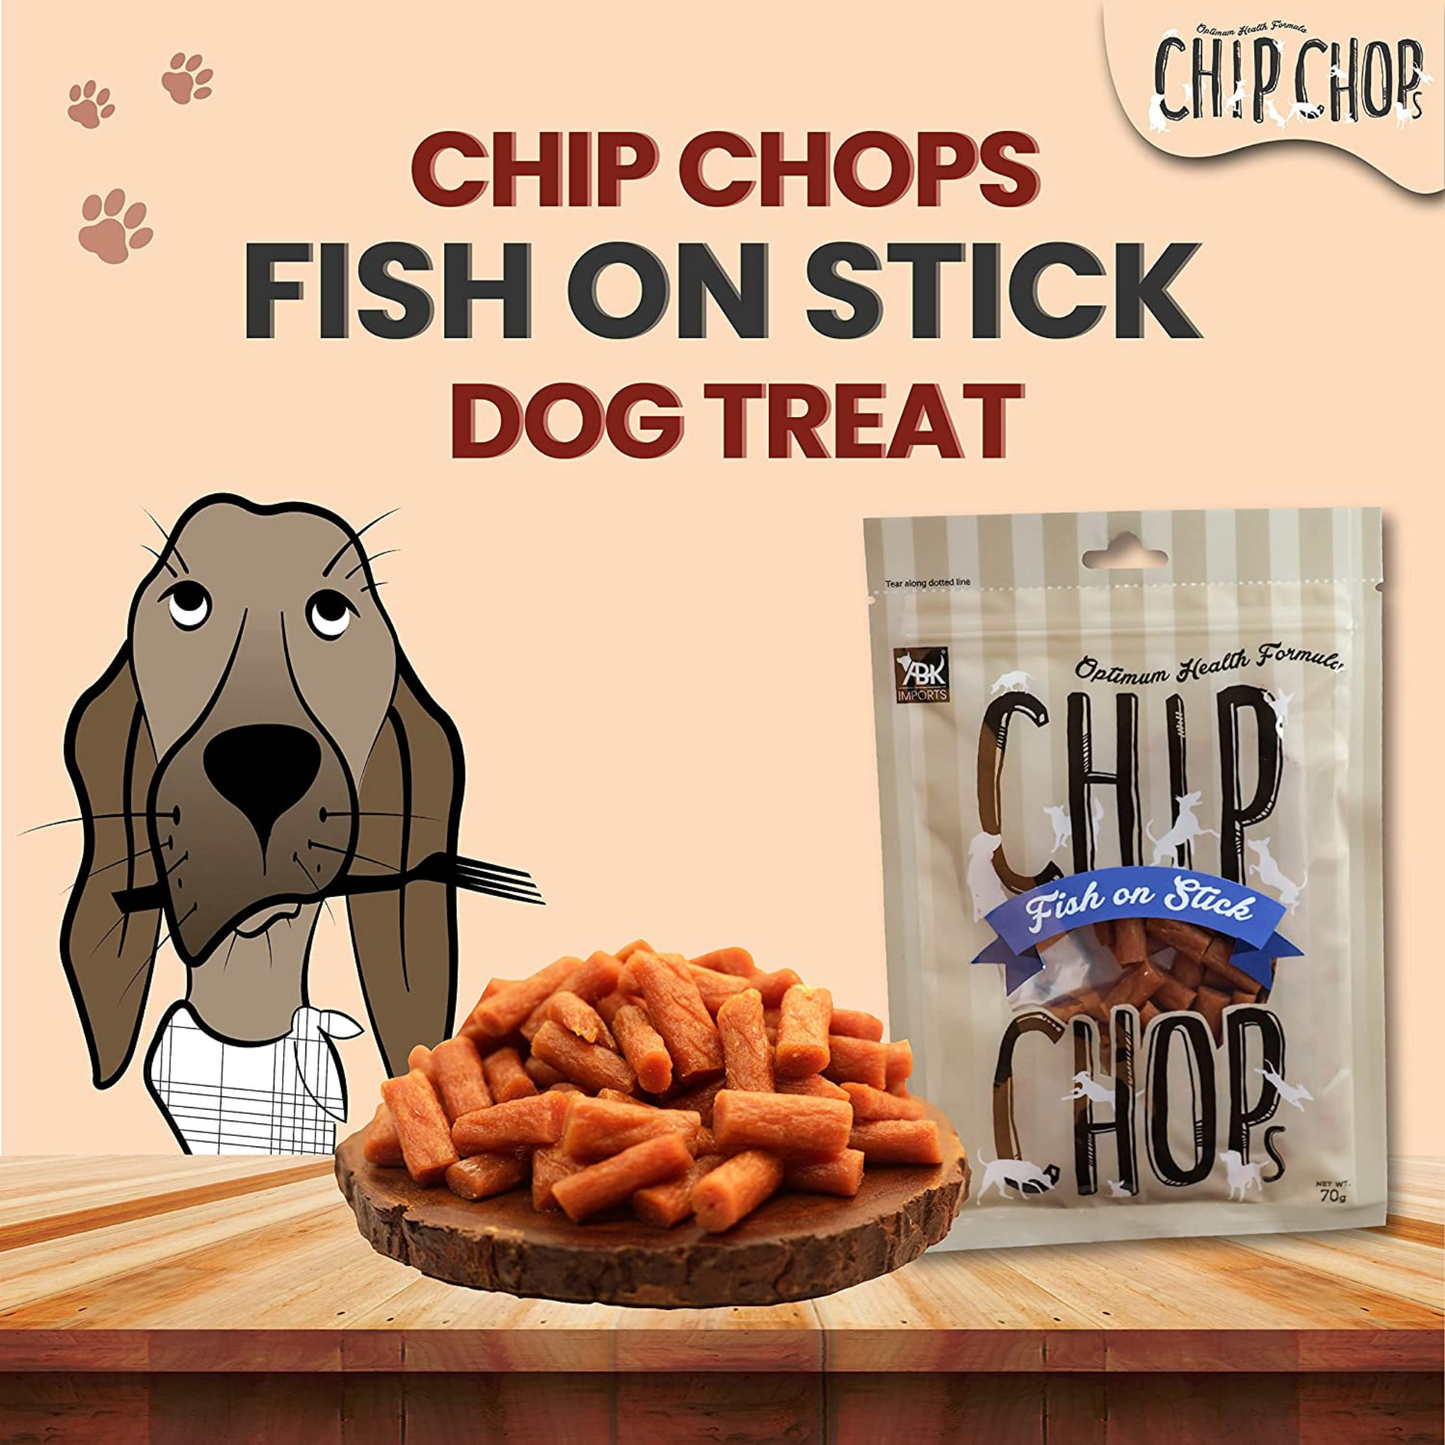 Chip Chops Dog Treats - Fish on Stick (70gm, Pack of 4)